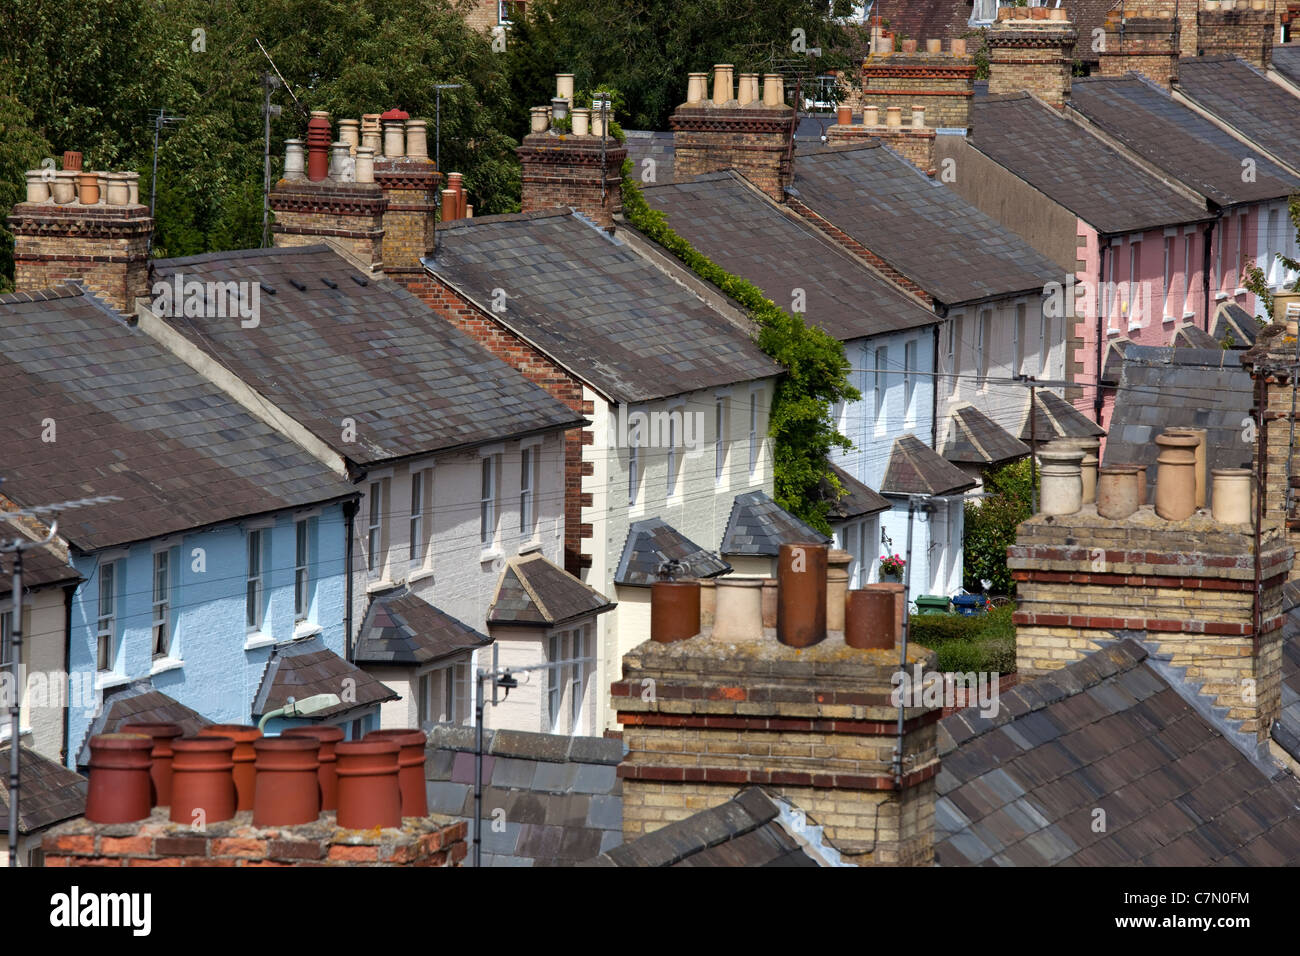 Residential Terraced Housing in Oxford City street, England Stock Photo